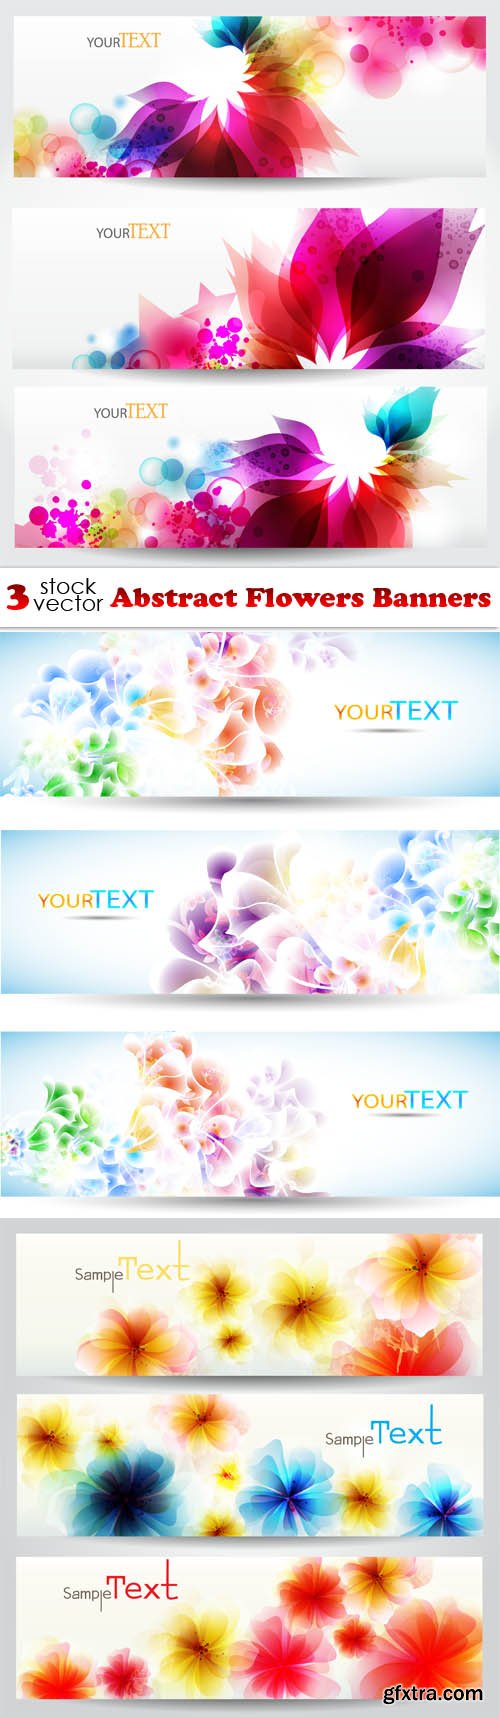 Vectors - Abstract Flowers Banners